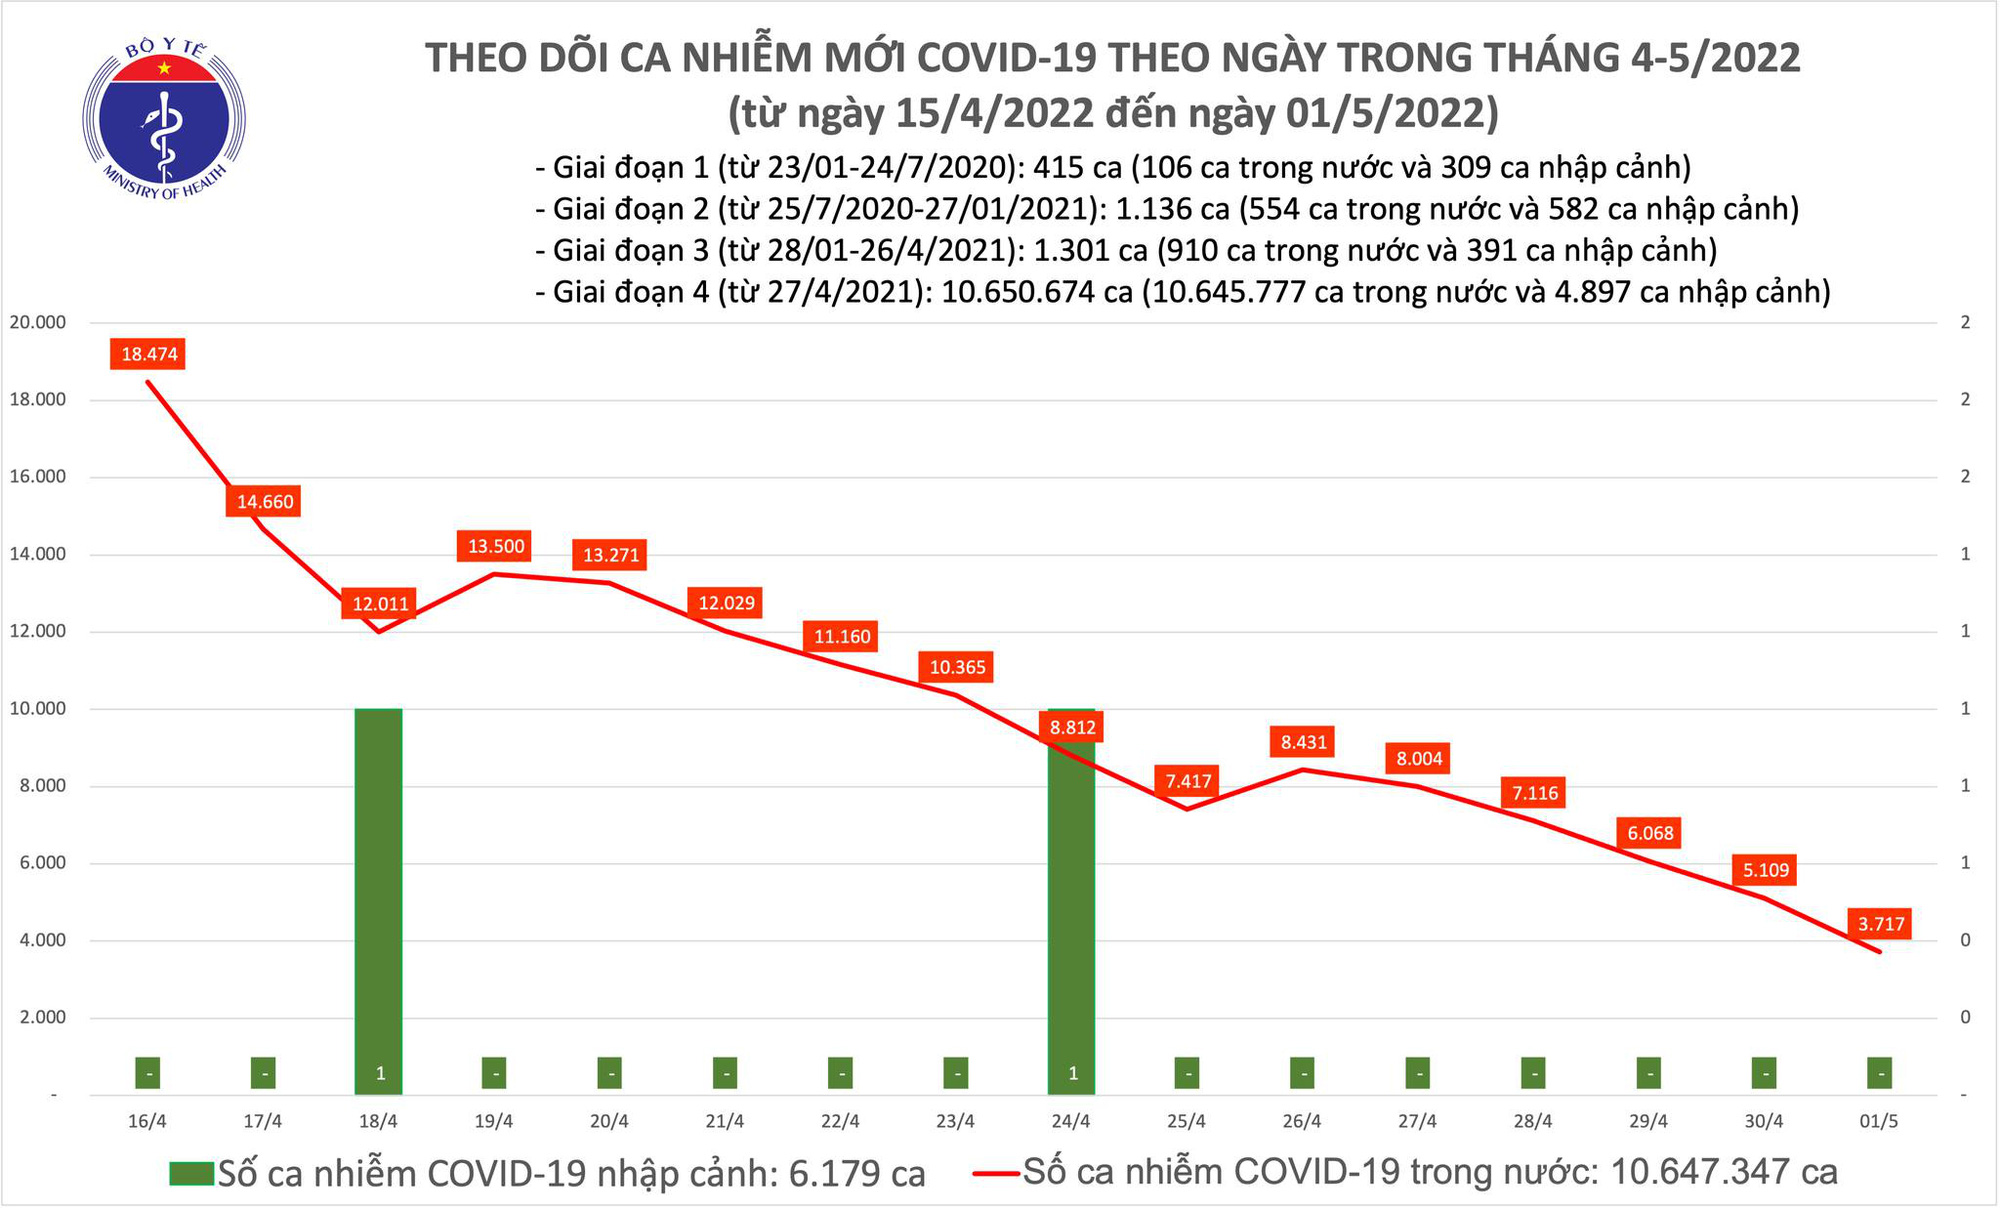 Covid-19 on May 1: There were 3,700 new Covid-19 cases and 1 death - Photo 1.